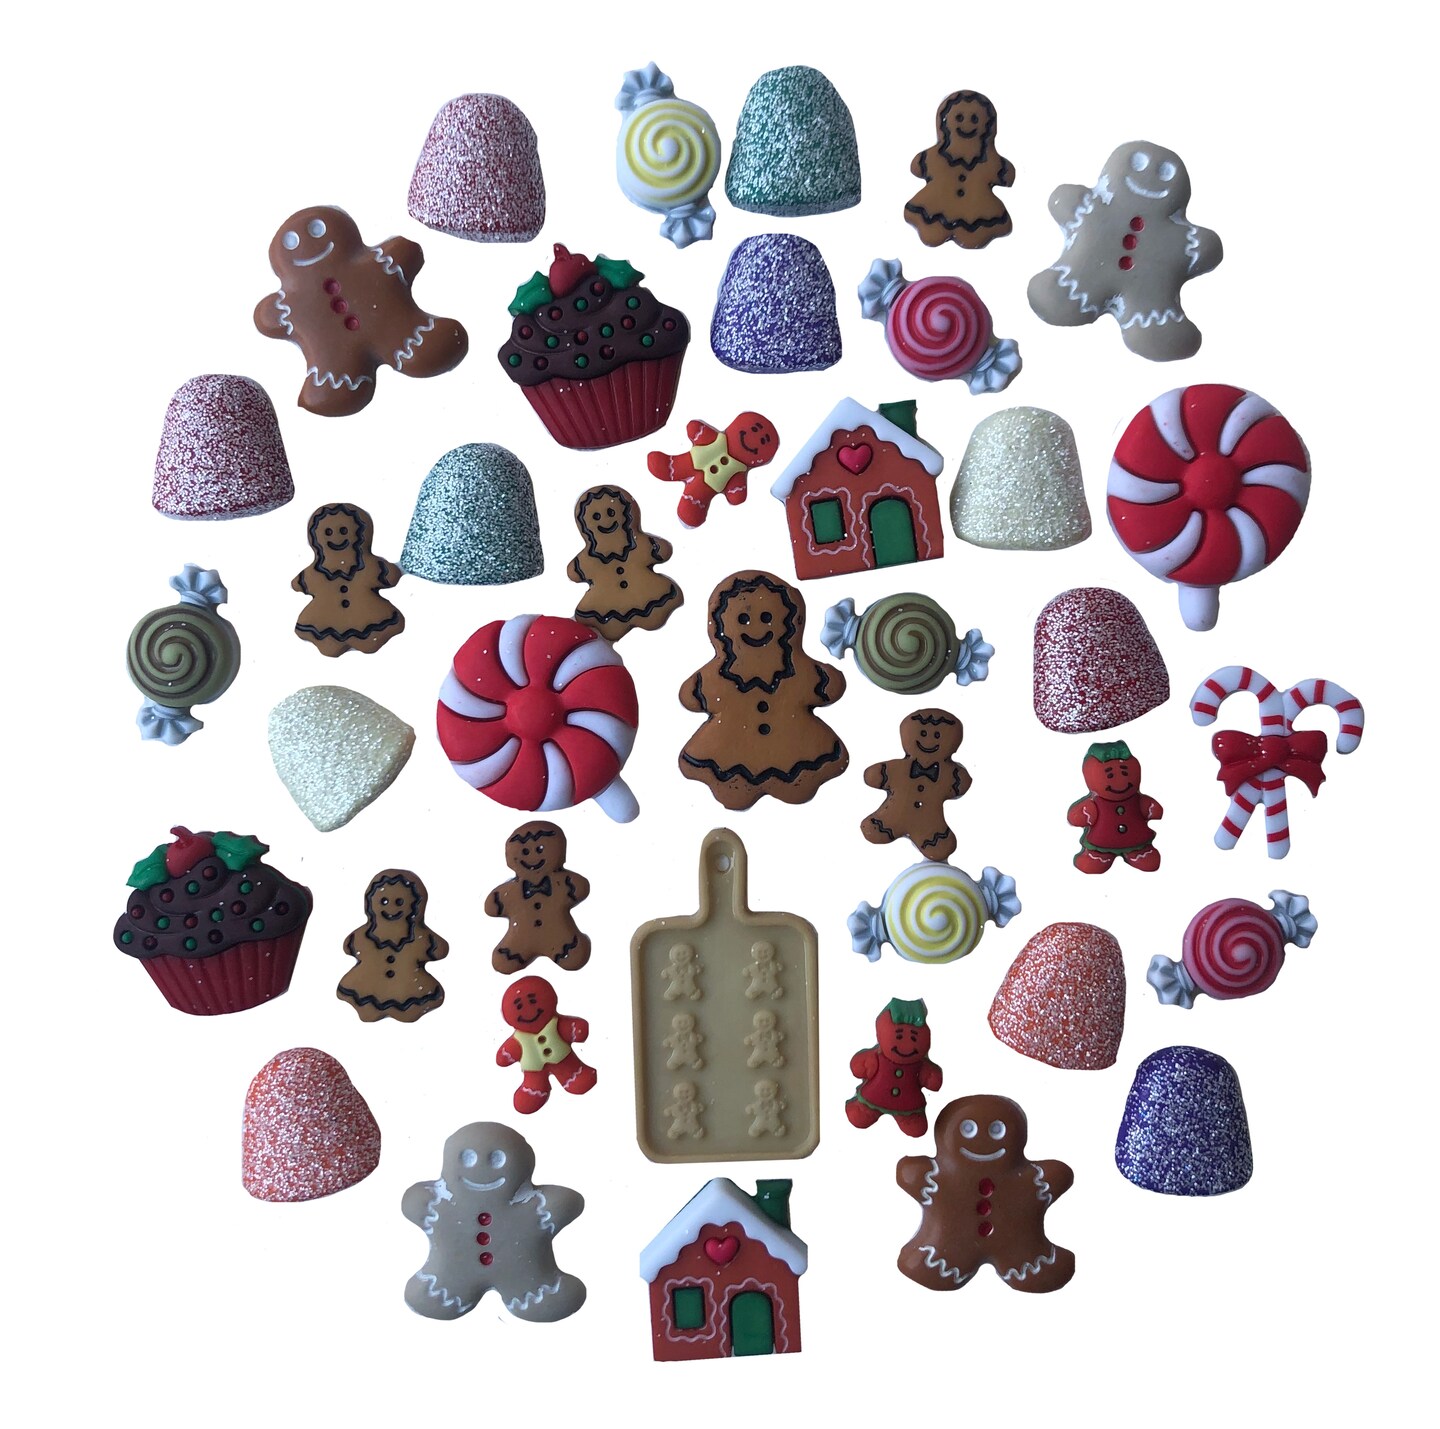 Buttons Galore Gingerbread and Christmas Button Super Value Pack for DIY Craft and Sewing Projects